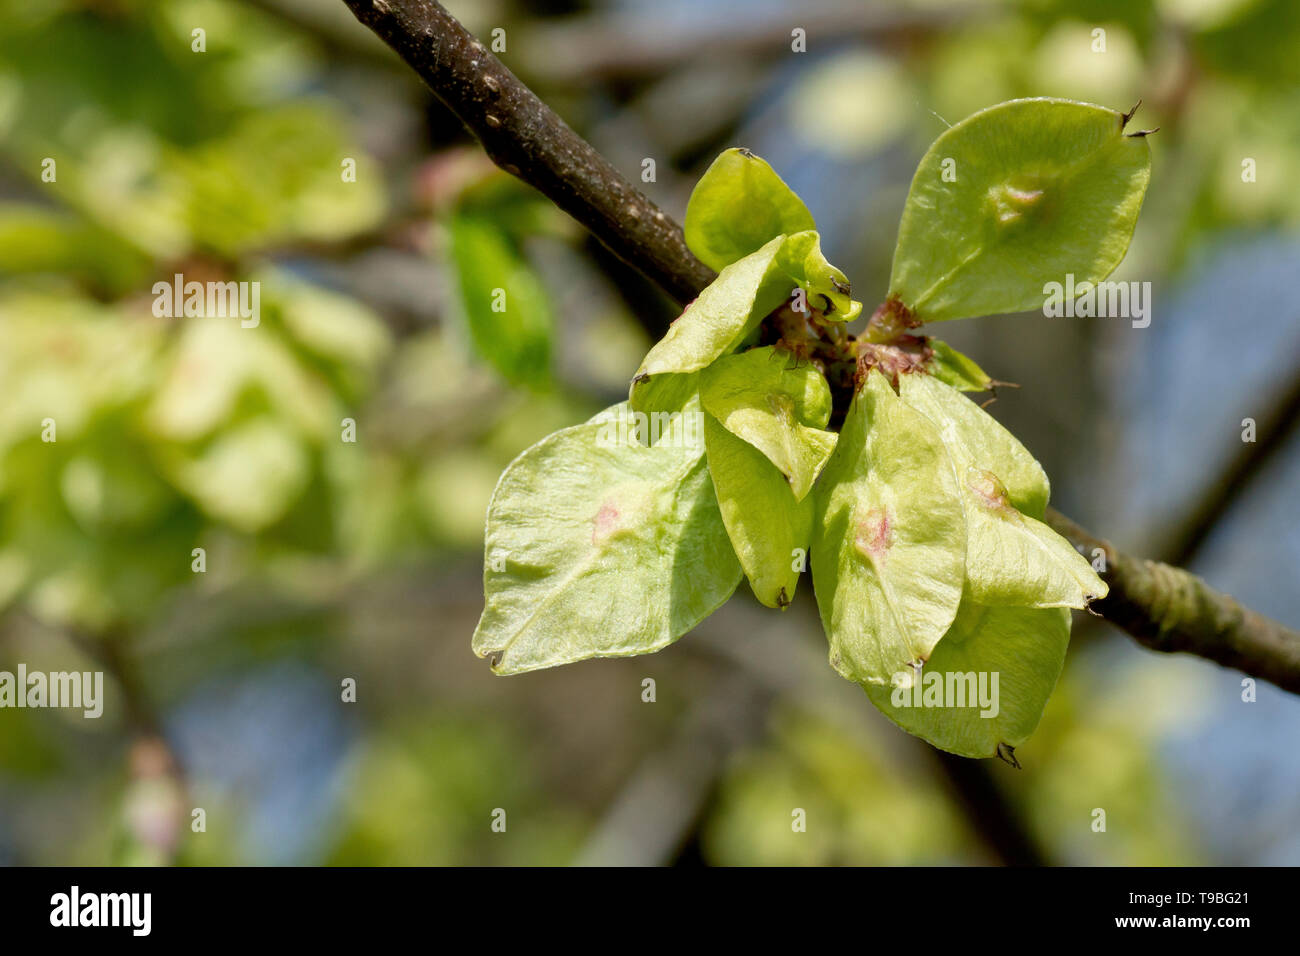 Wych Elm (ulmus glabra), close up of the fruit or seed pods of the tree. Stock Photo